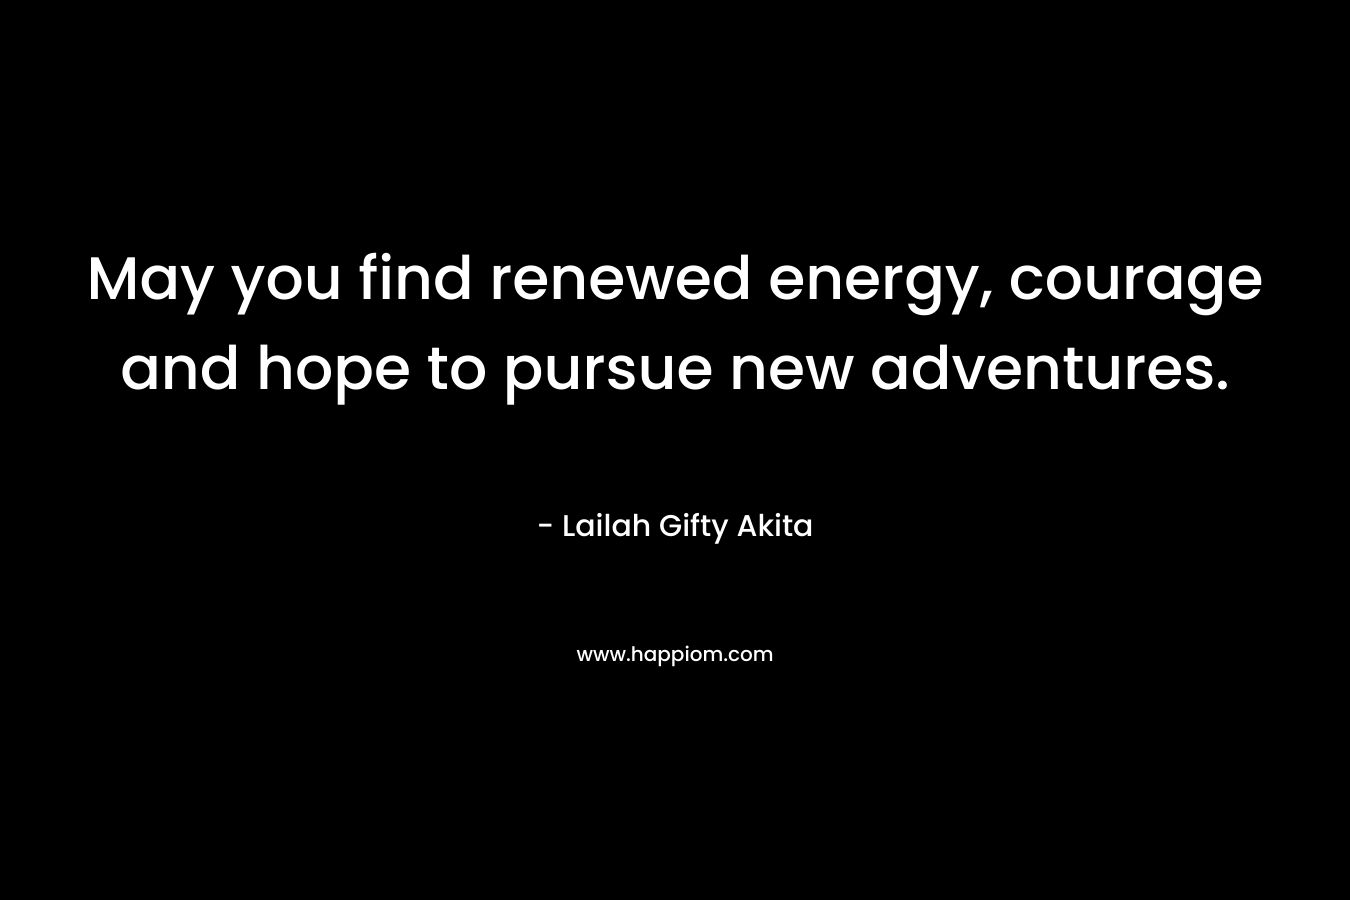 May you find renewed energy, courage and hope to pursue new adventures.